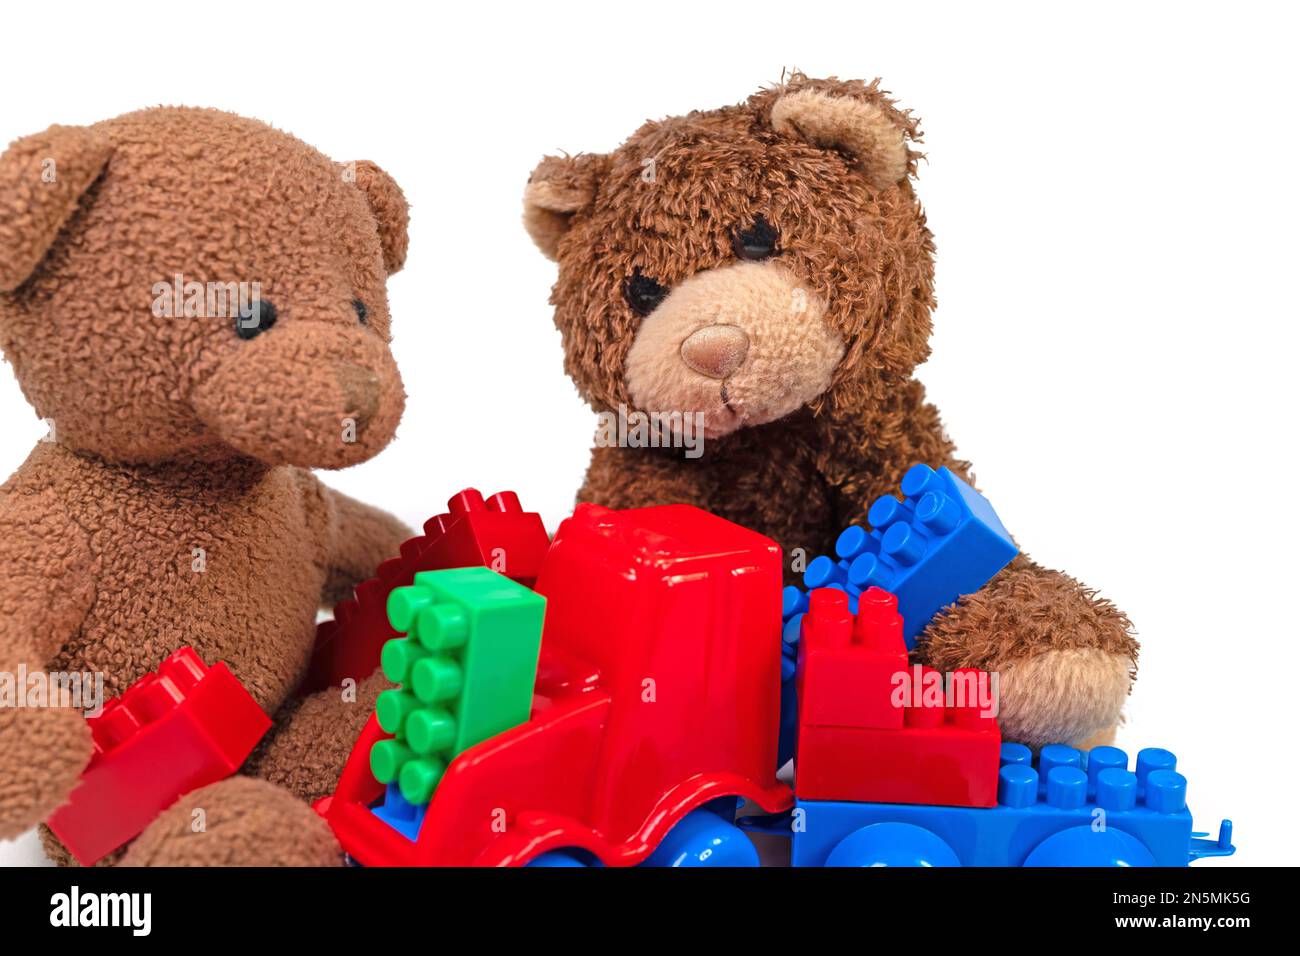 Plush bears and plastic building blocks against a white background Stock Photo